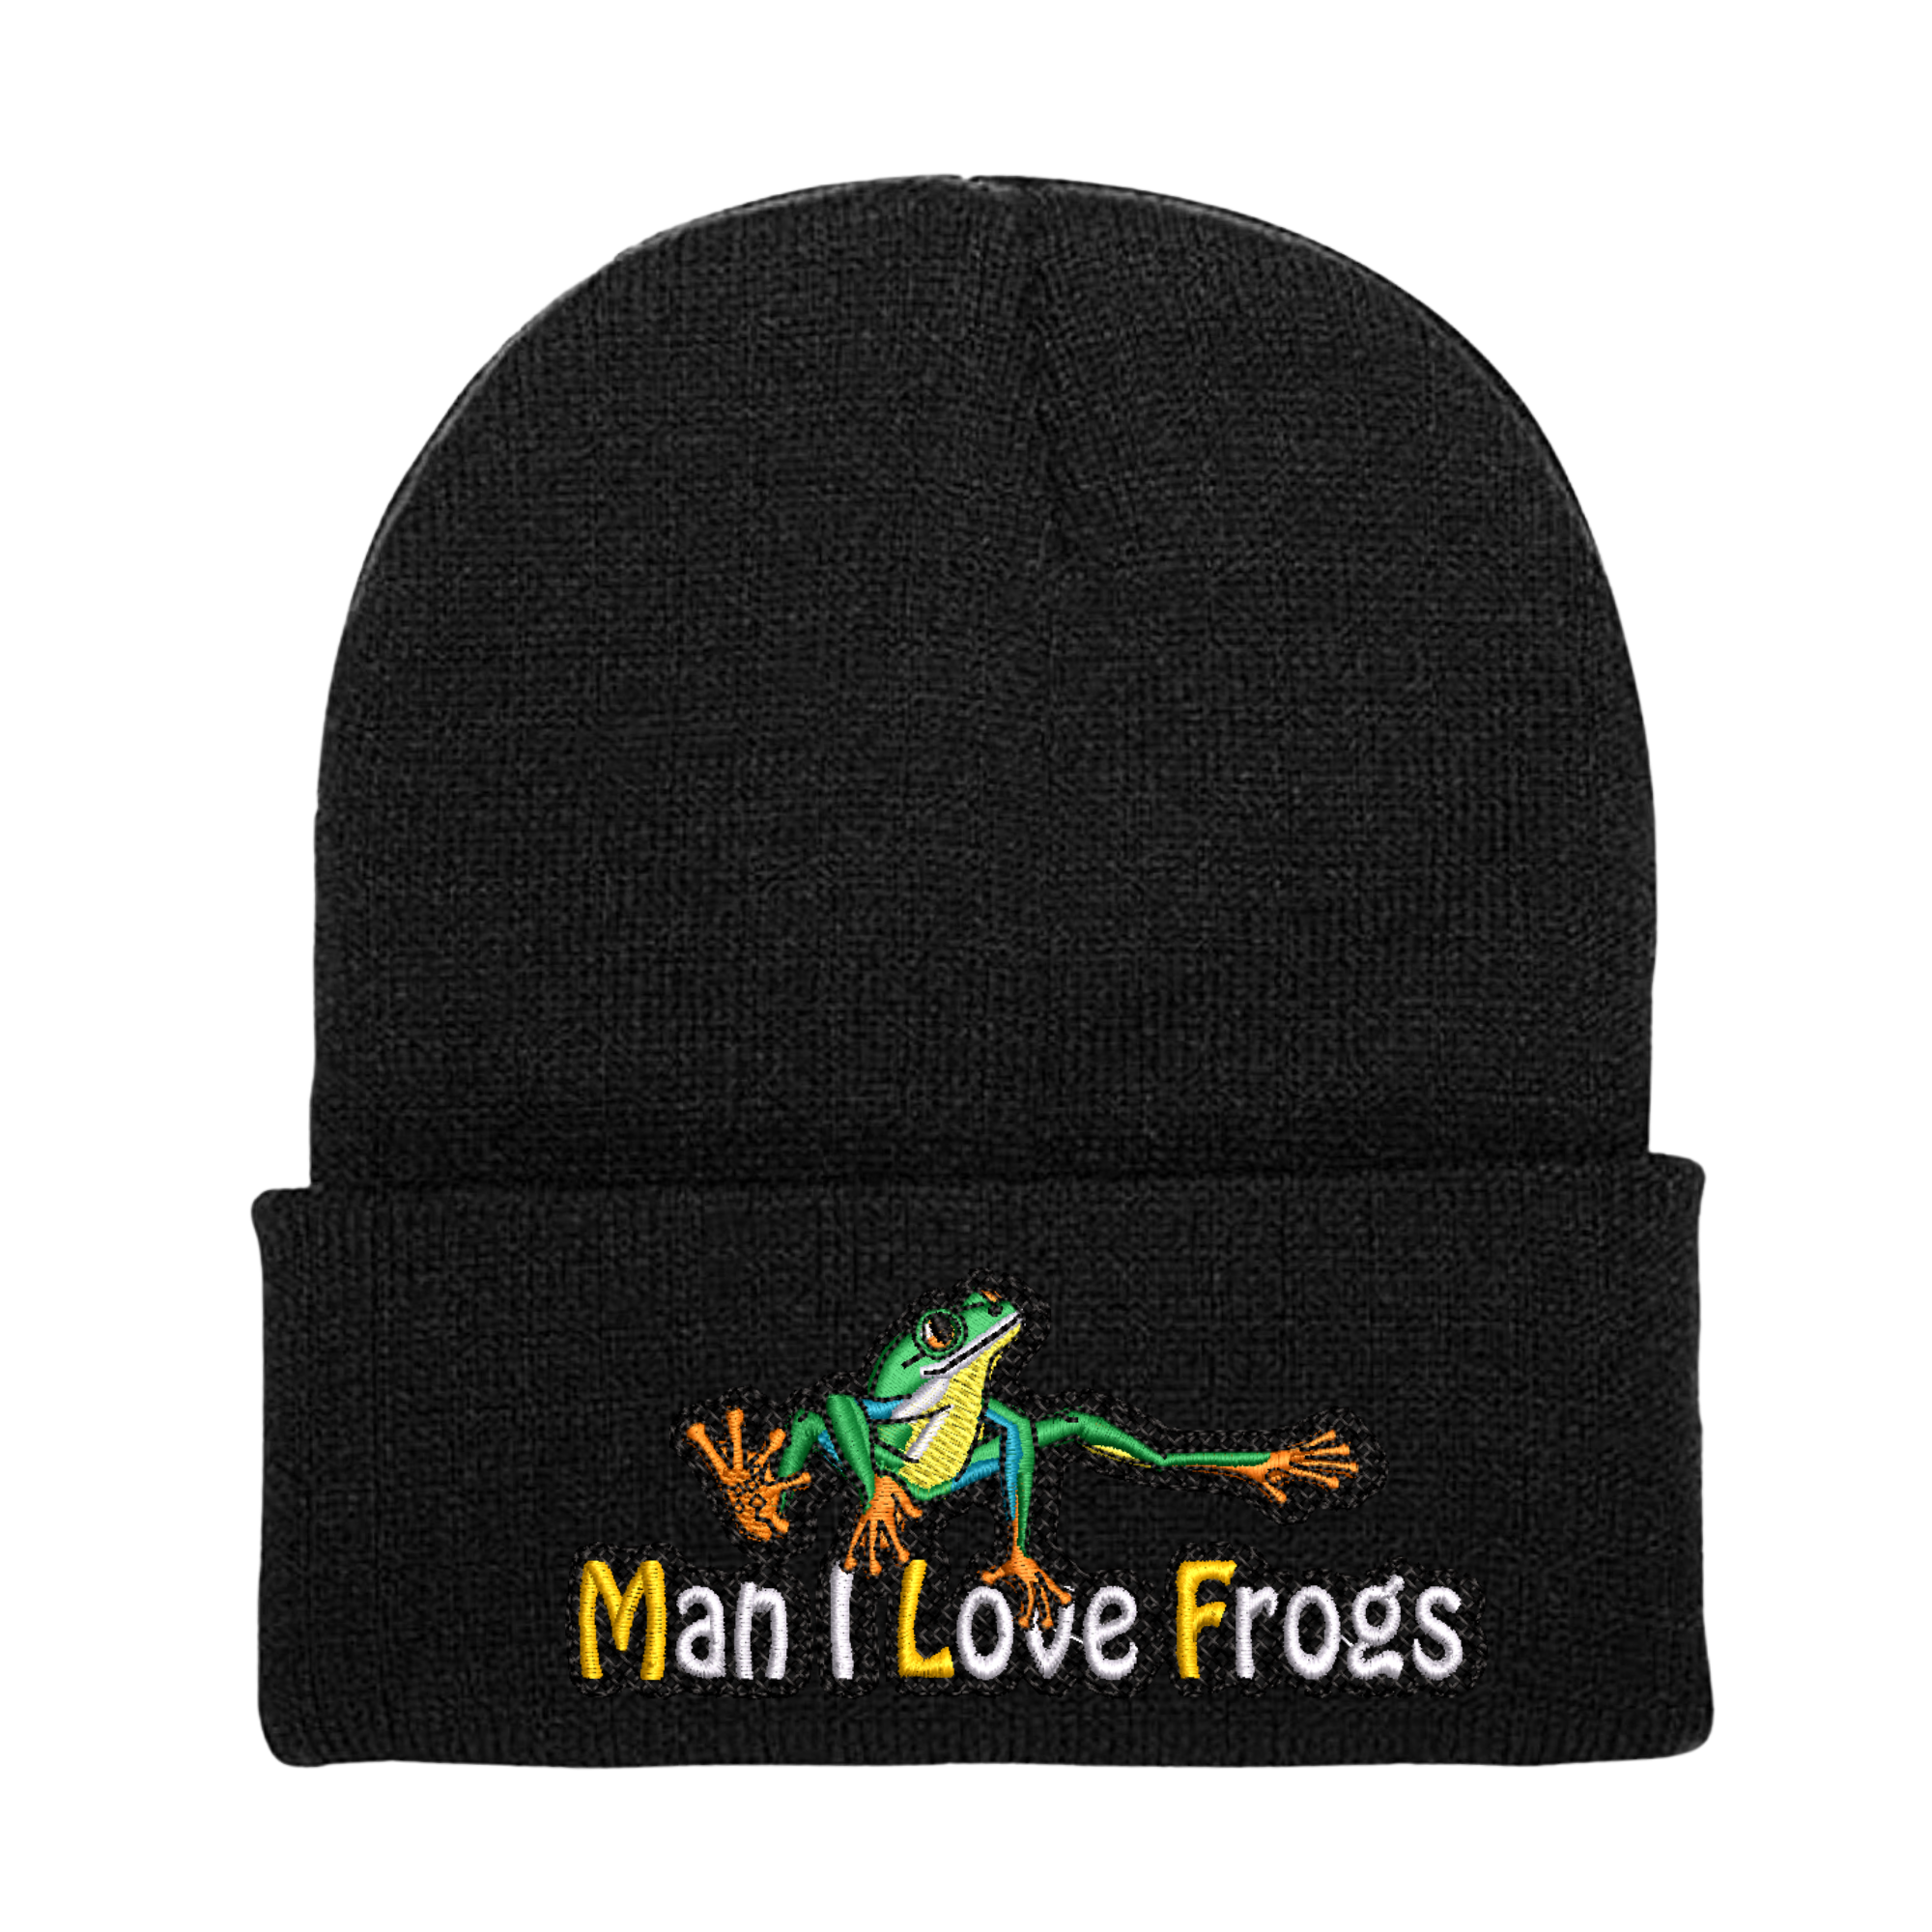 Man I Love Frogs Embroidered Beanie Hat, One Size Fits All